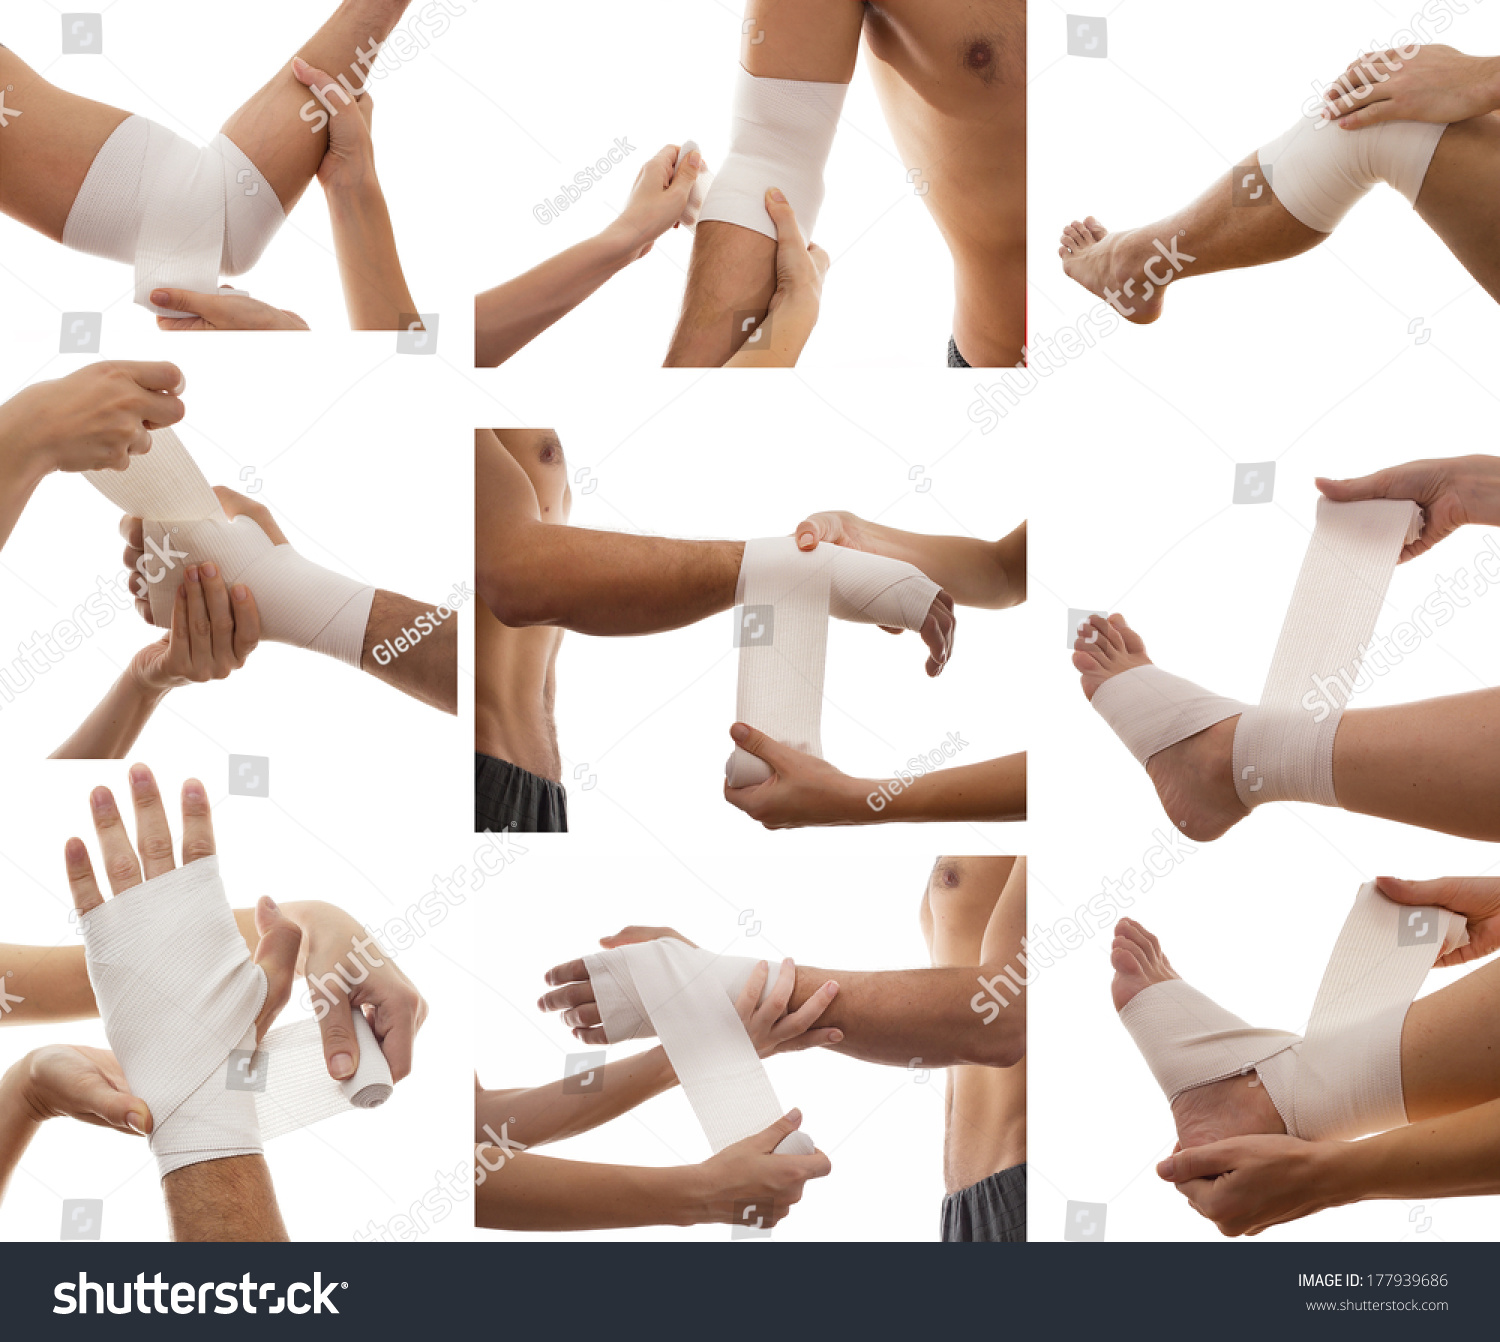 List 90+ Background Images Types Of Bandages Pictures Stunning